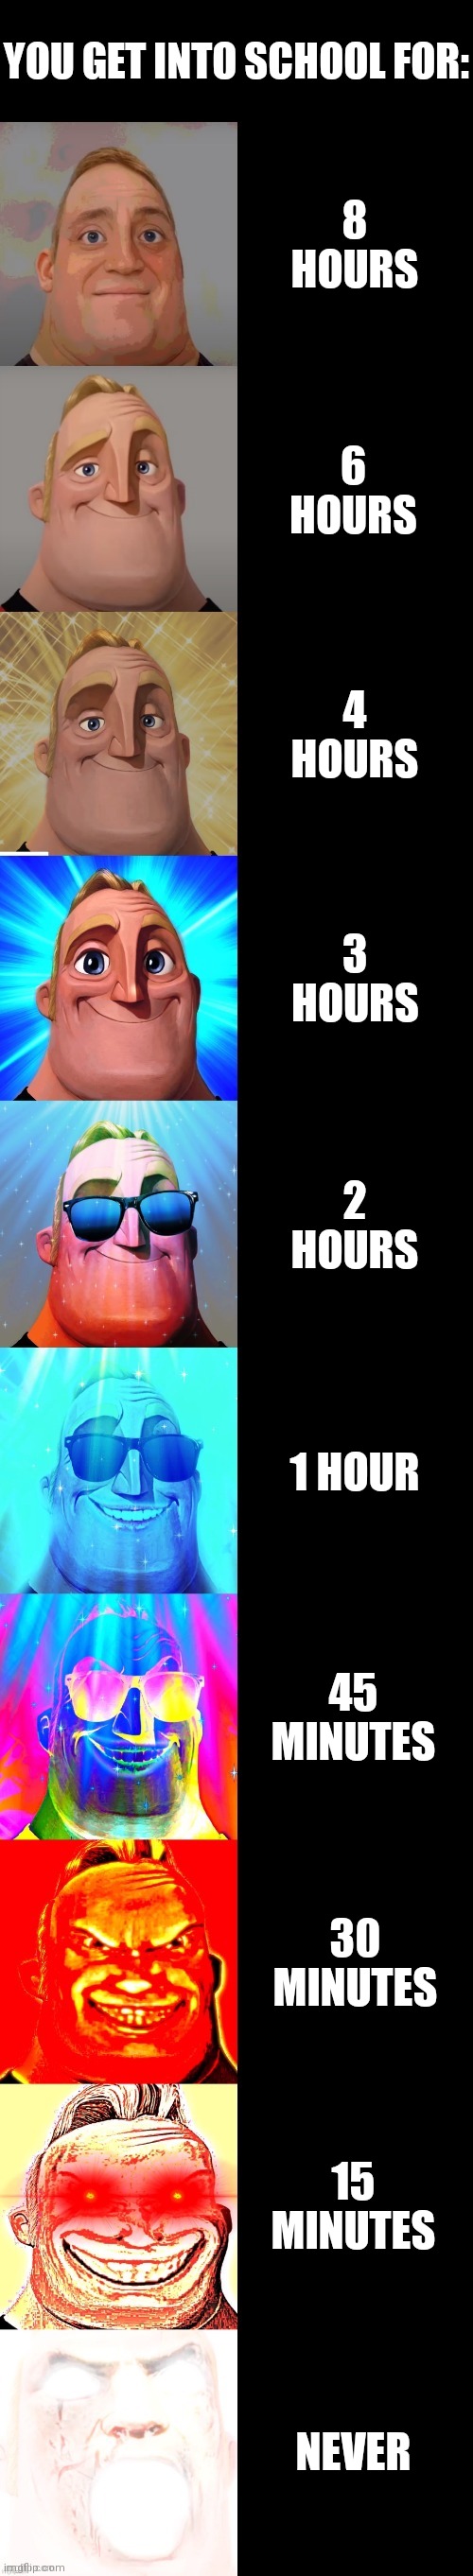 You get to school for these amount of times | YOU GET INTO SCHOOL FOR:; 8 HOURS; 6 HOURS; 4 HOURS; 3 HOURS; 2 HOURS; 1 HOUR; 45 MINUTES; 30 MINUTES; 15 MINUTES; NEVER | image tagged in mr incredible becoming canny,memes,school,why are you reading the tags | made w/ Imgflip meme maker